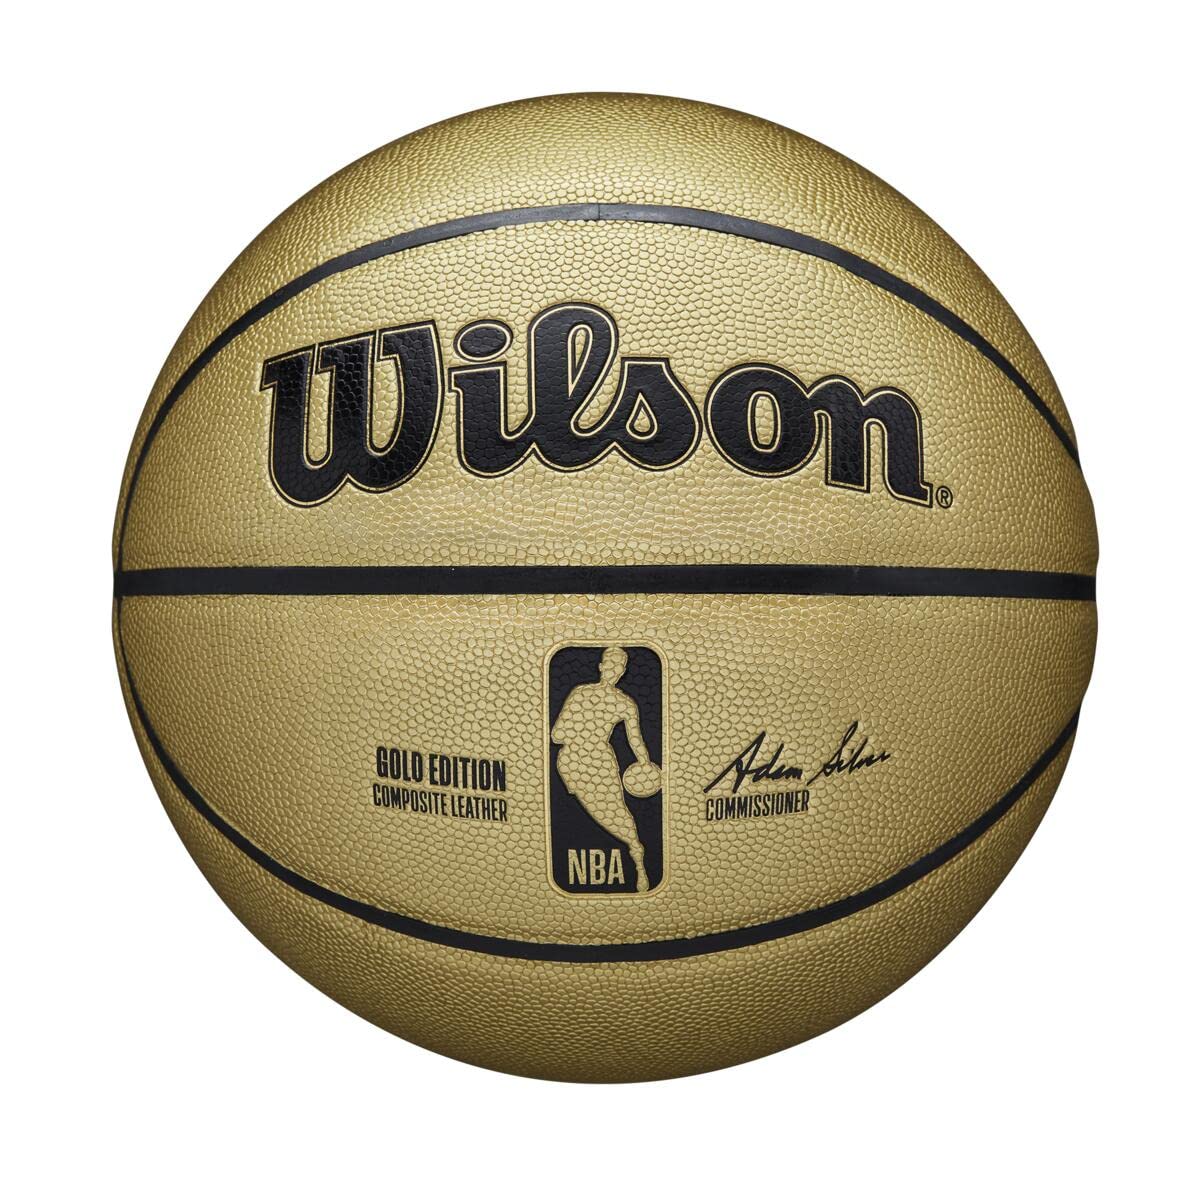 29.5" Wilson Alliance Series Commemorative NBA Autograph Gold Edition Basketball $27.43 + Free Shipping w/ Prime or on $35+